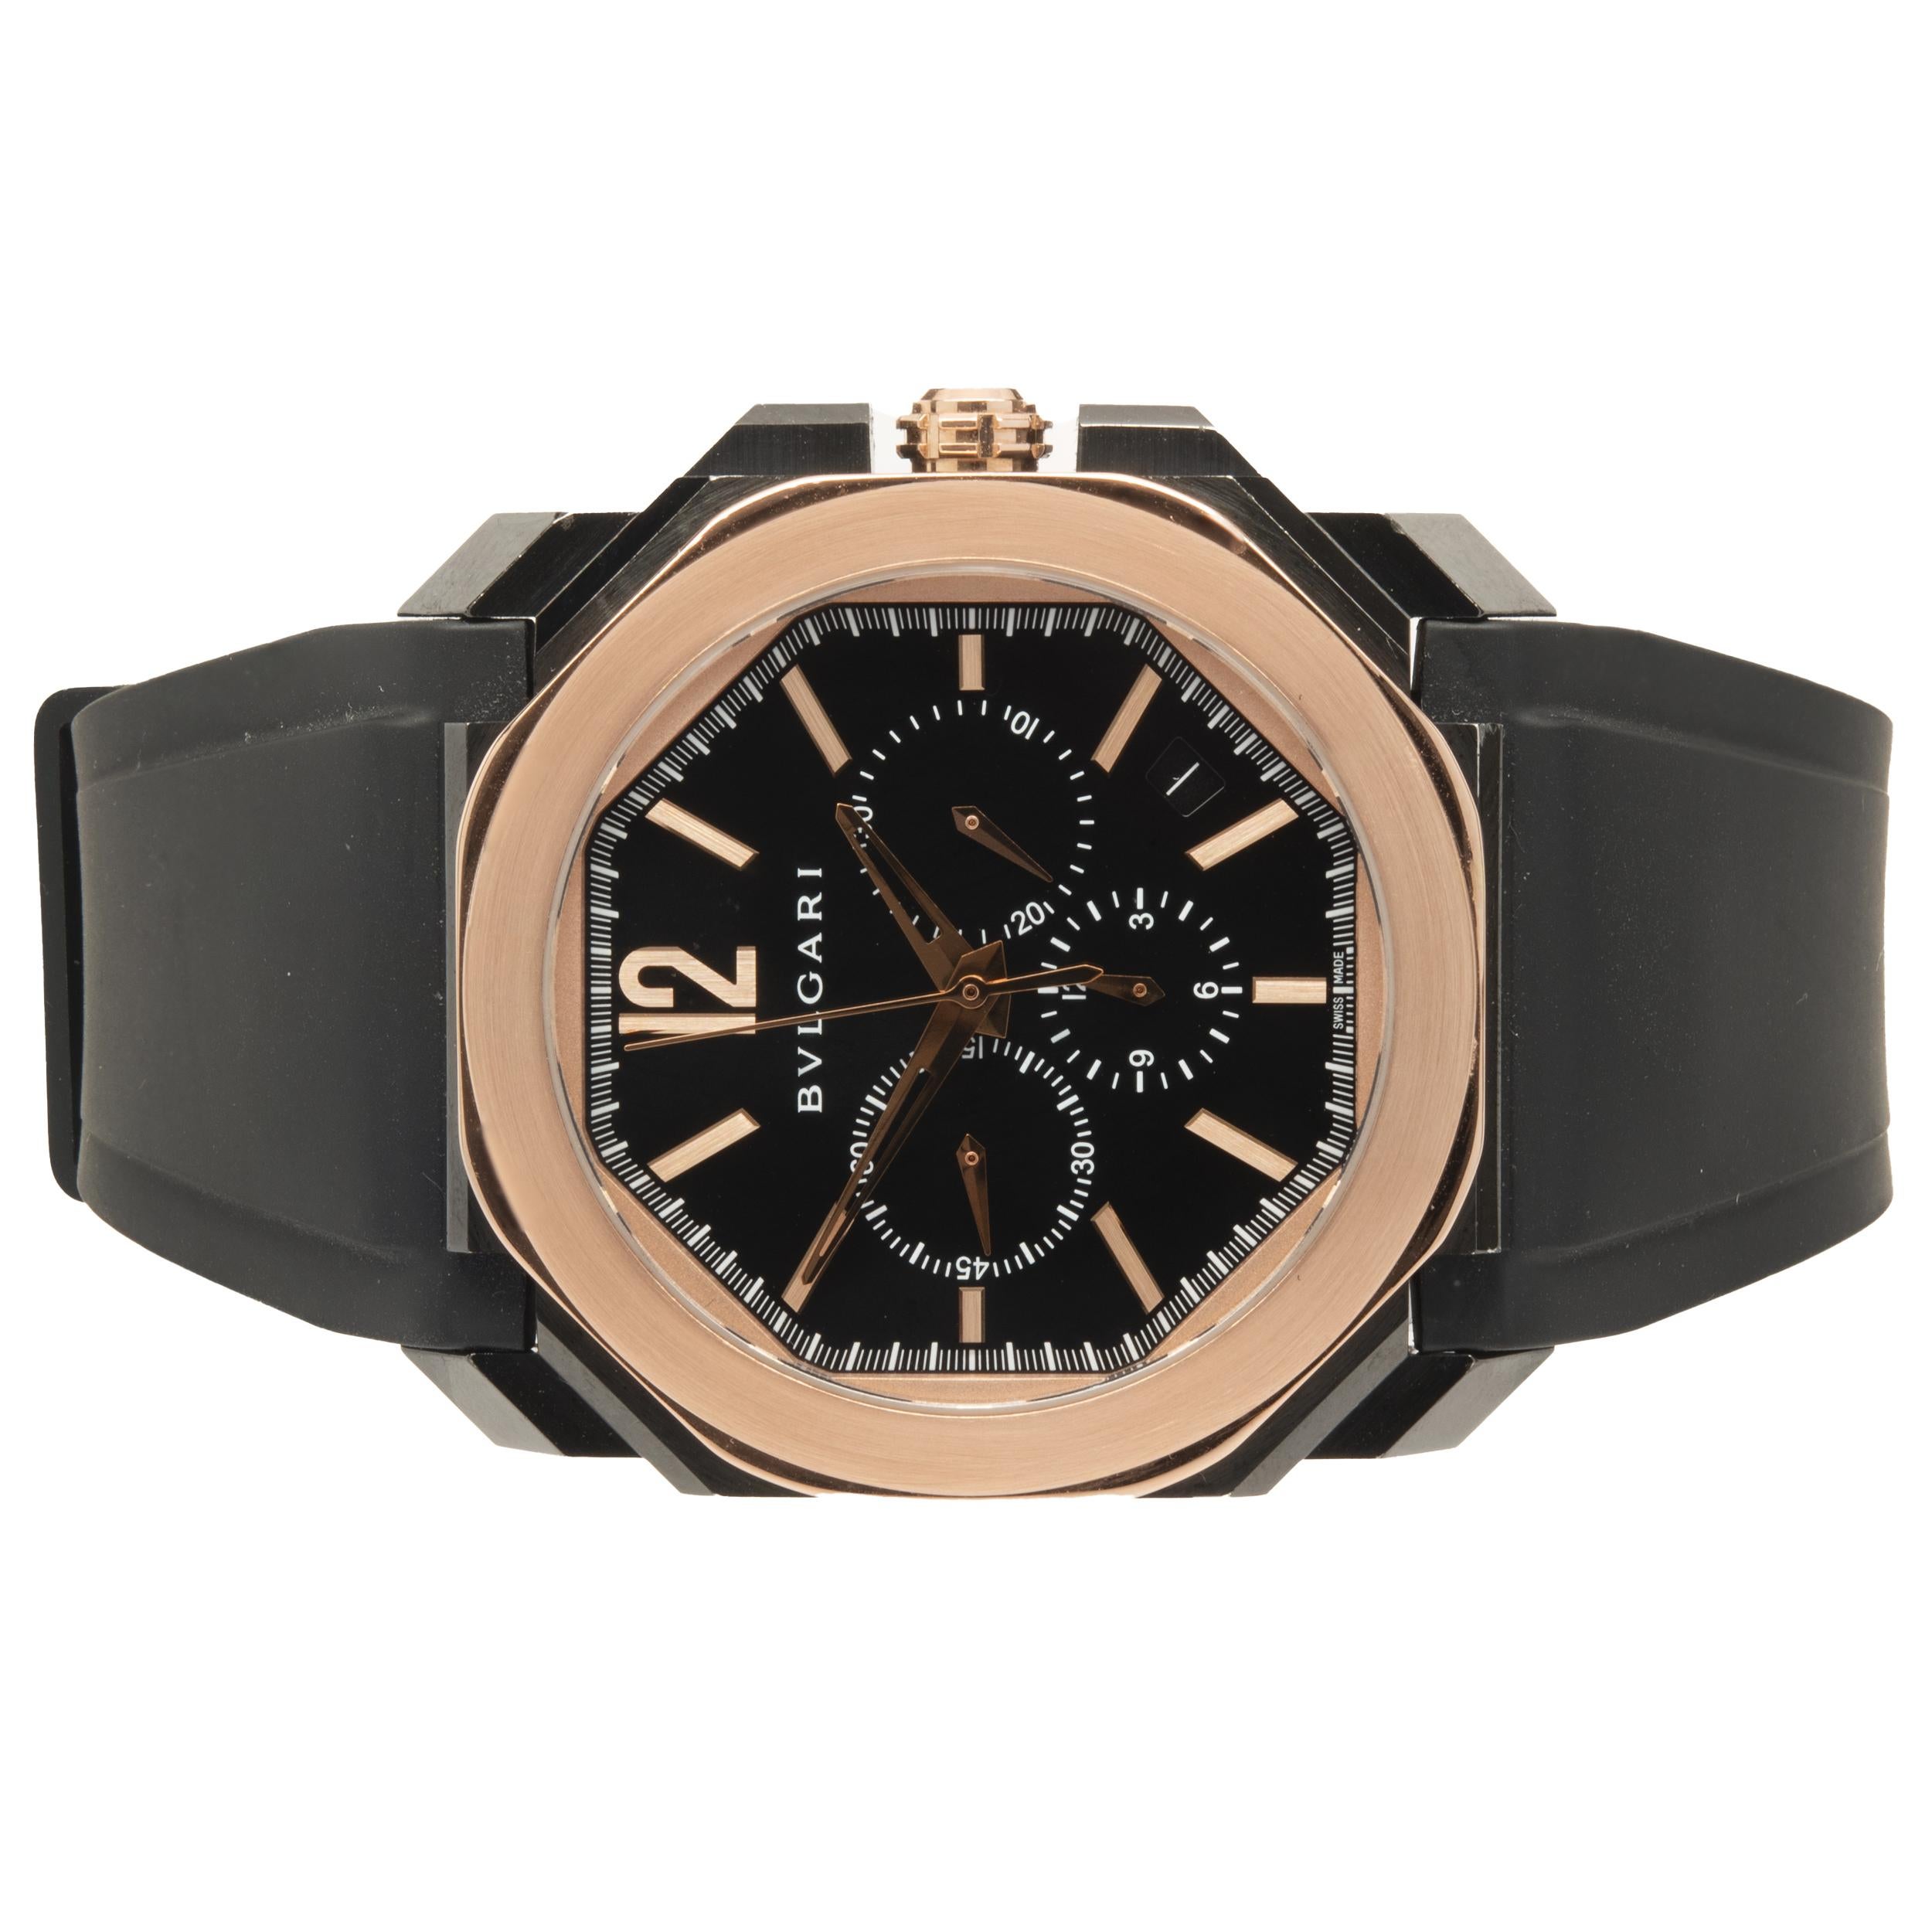 Movement: automatic
Function: hours, minutes, seconds, date, chronograph
Case: 41mm octagonal case, smooth 18K rose gold Bulgari bezel, sapphire crystal
Band: Bulgari black rubber strap, buckle
Dial: black chronograph, arabic/stick numerals
Serial